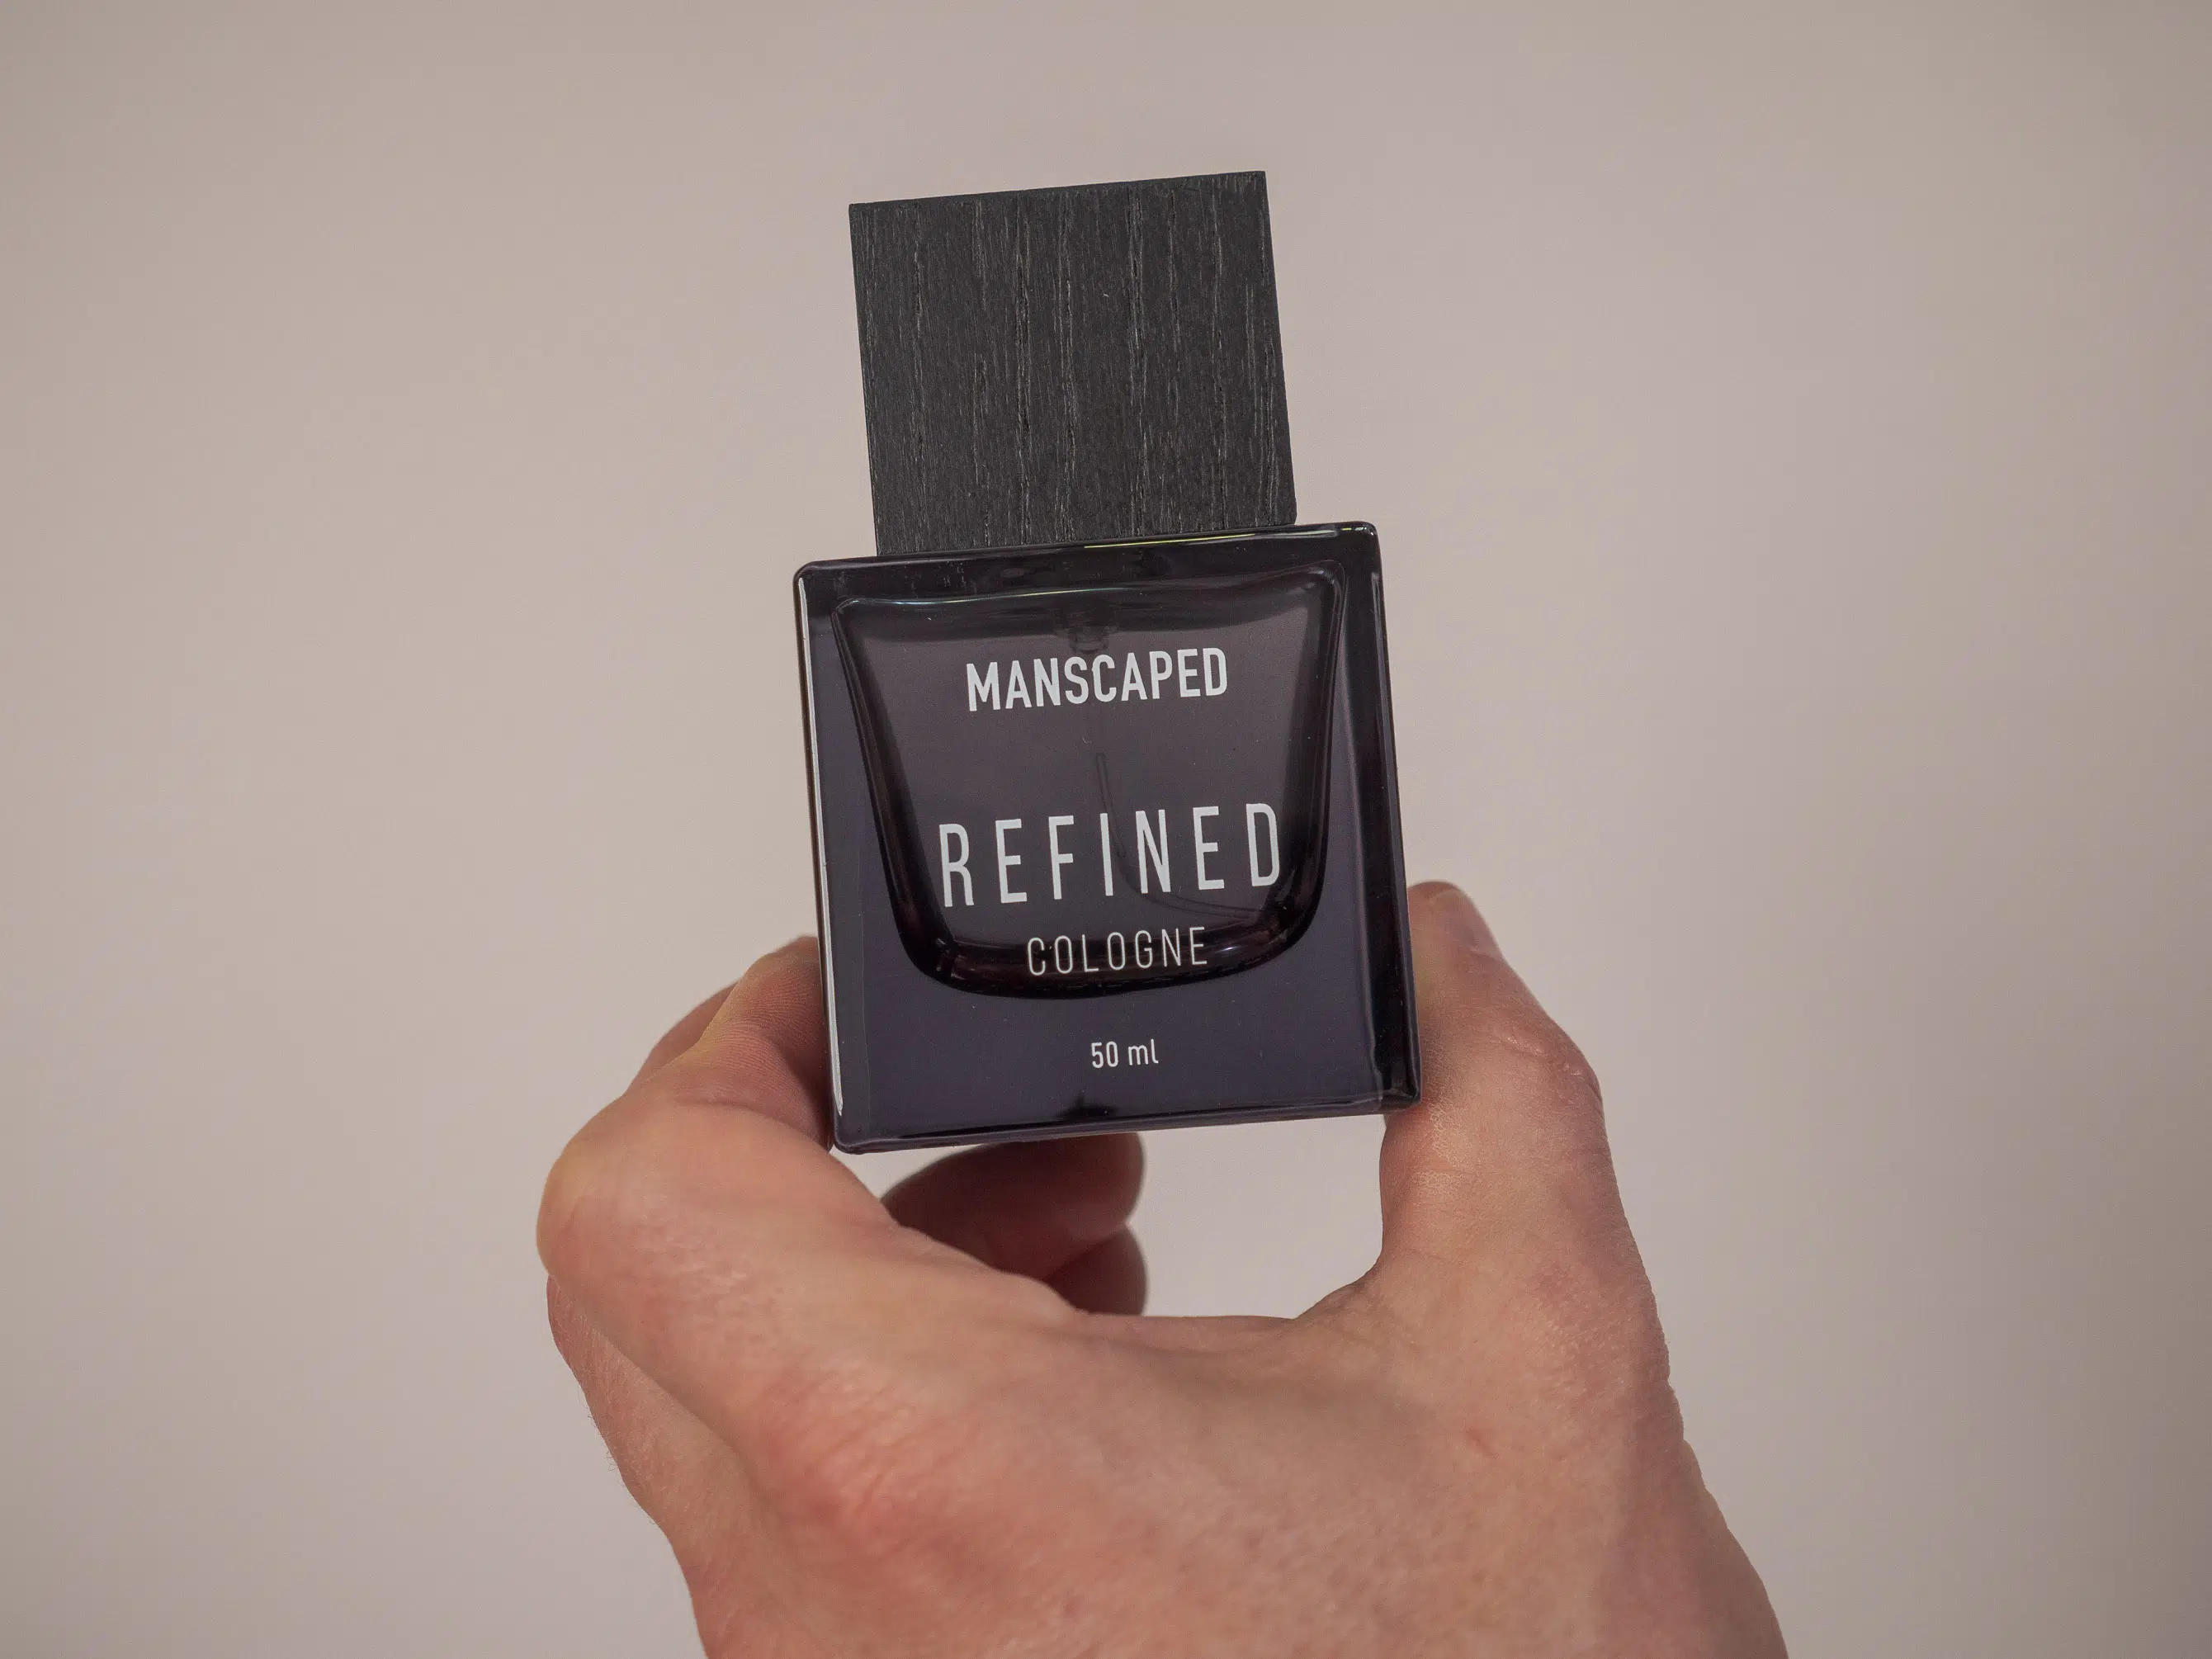 Manscaped Refined cologne